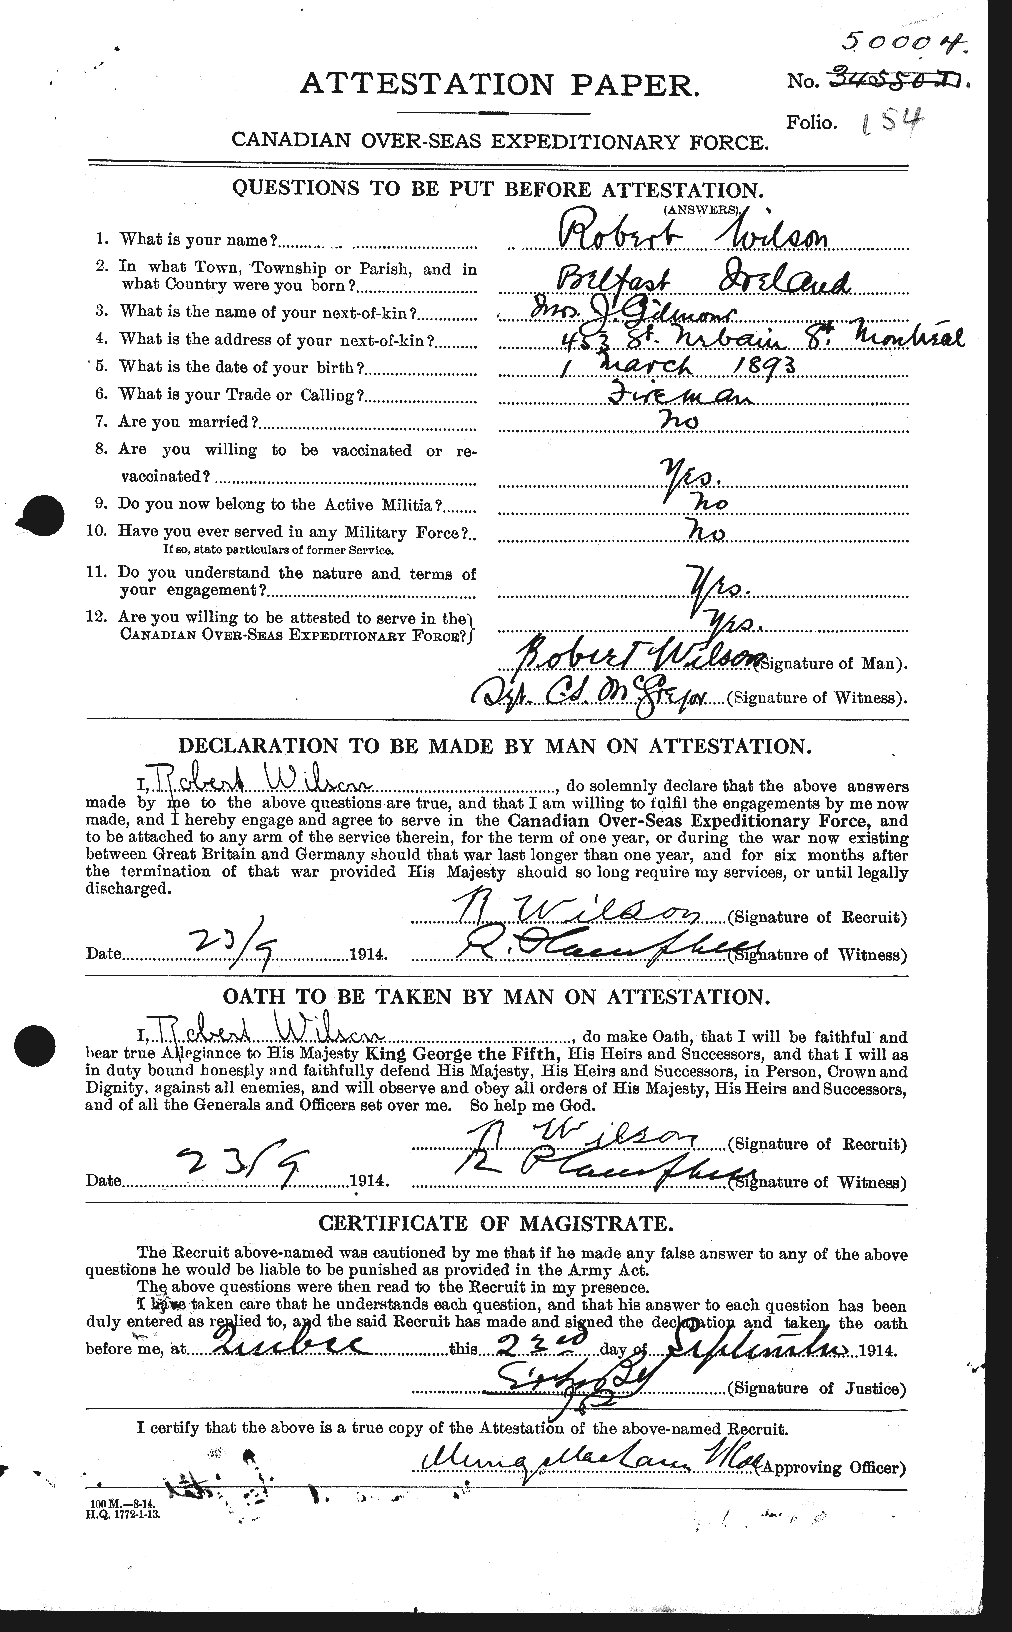 Personnel Records of the First World War - CEF 680928a